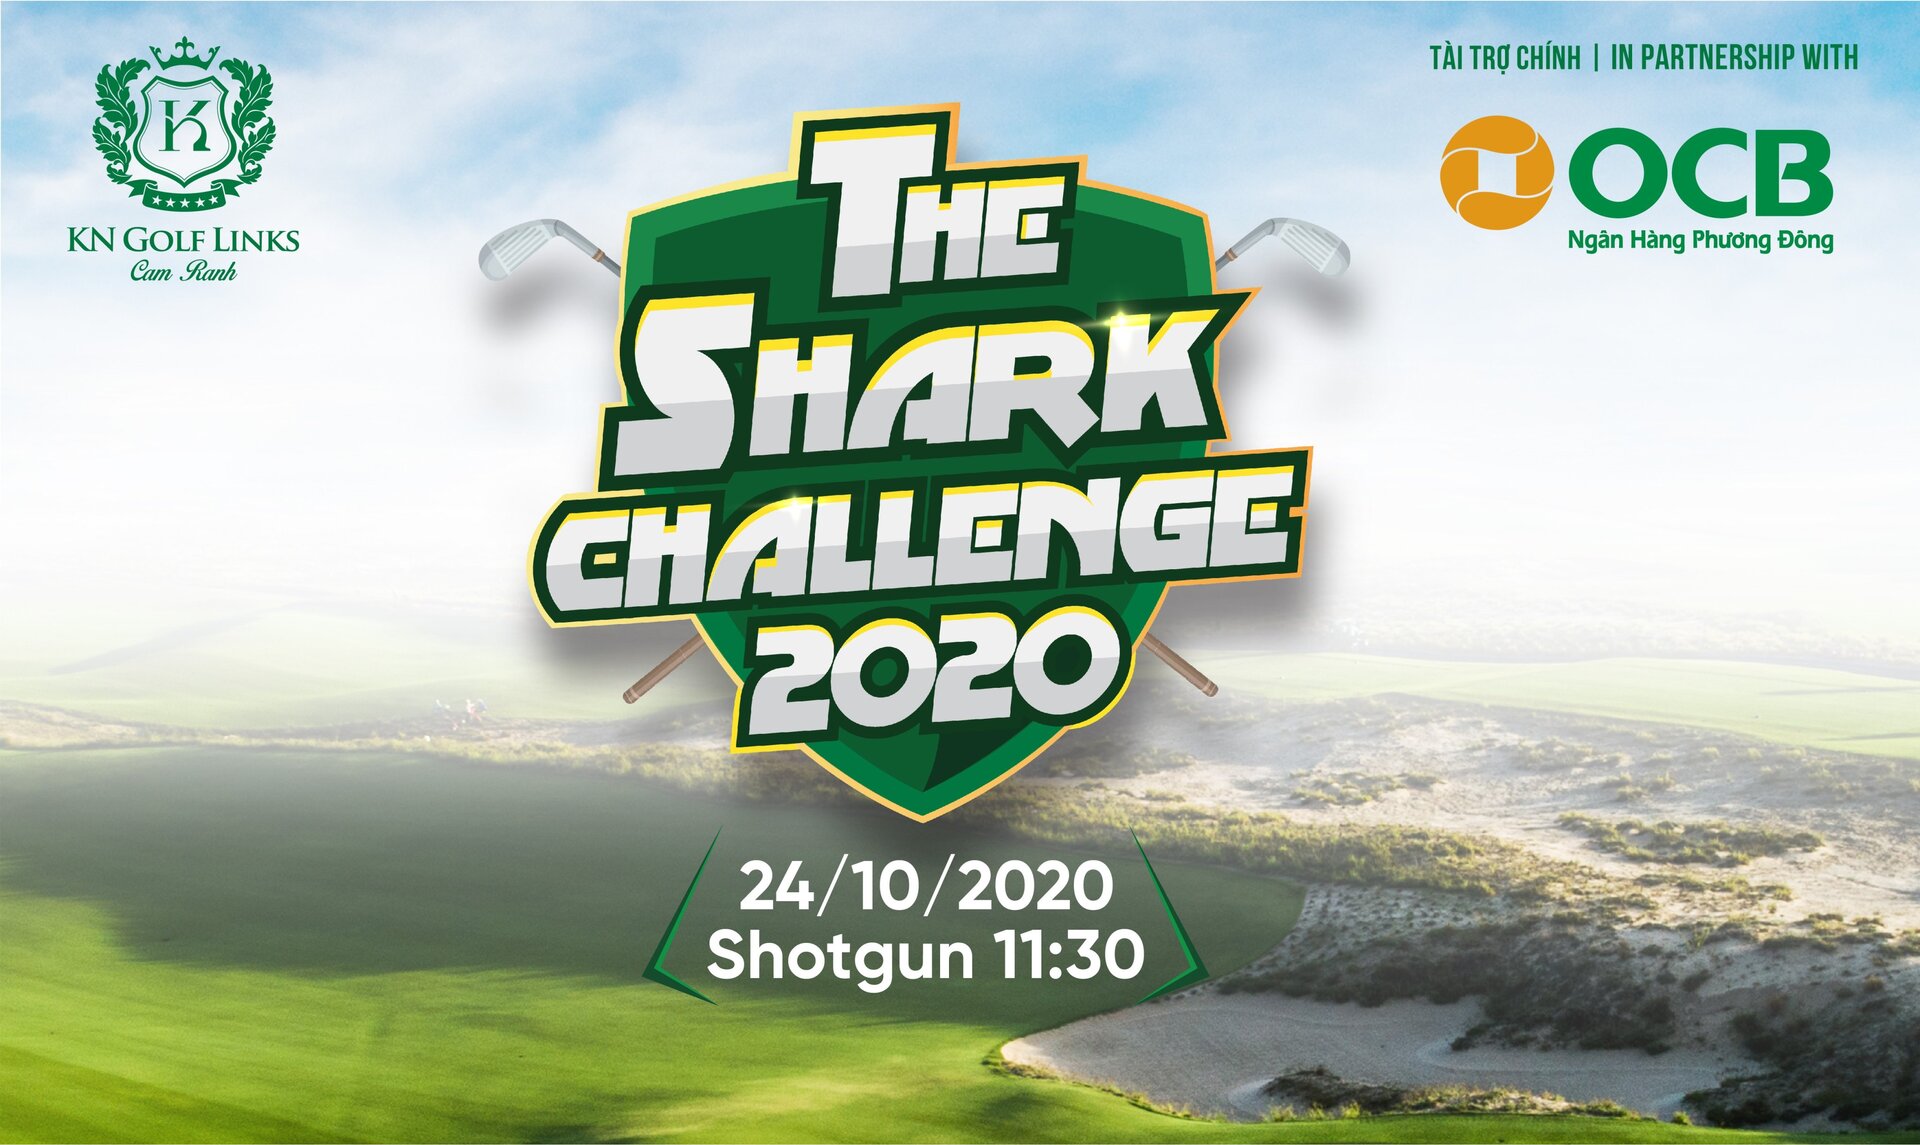 The Shark Challenge 2020 will be organized on 24/10/2020